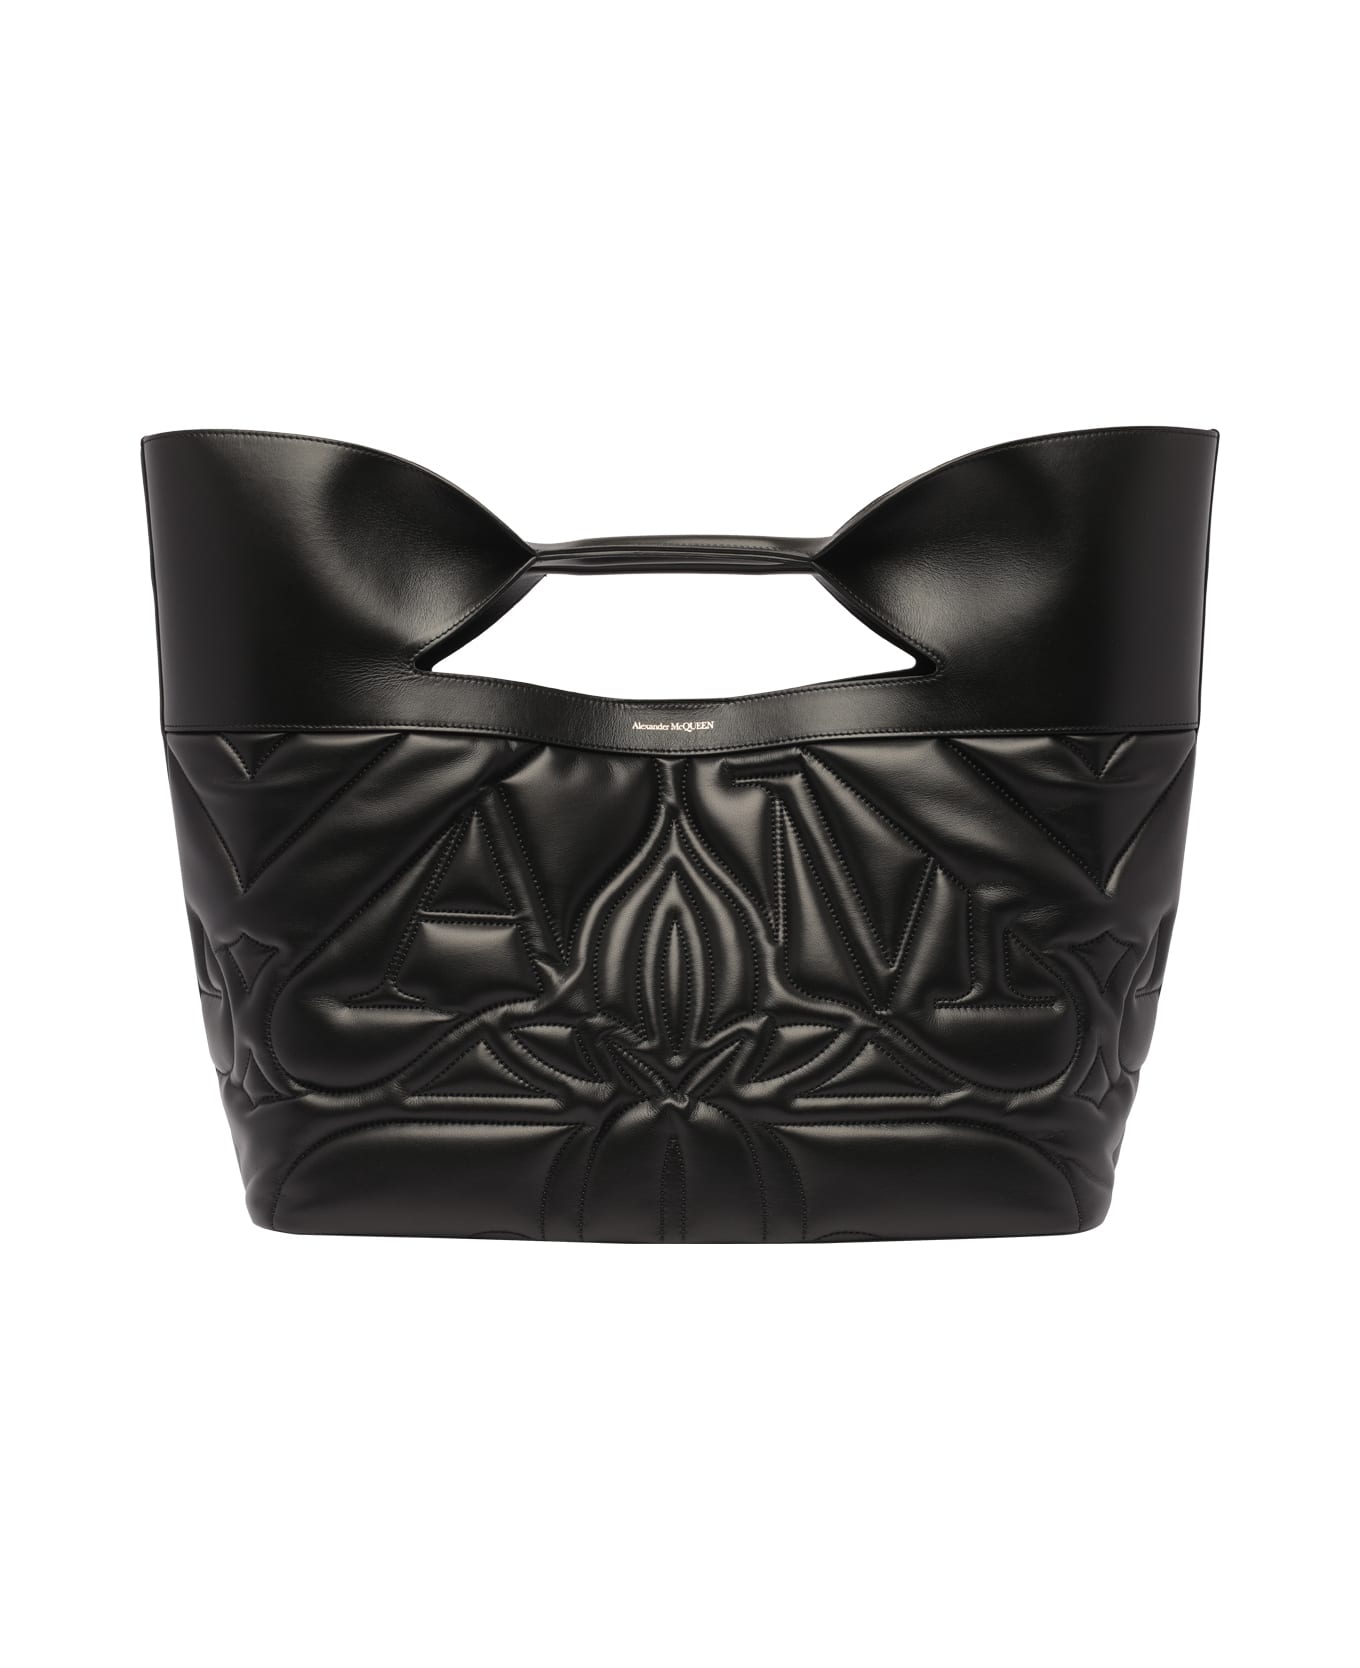 Alexander McQueen Large The Bow Bag In Quilted Black Leather - Nero